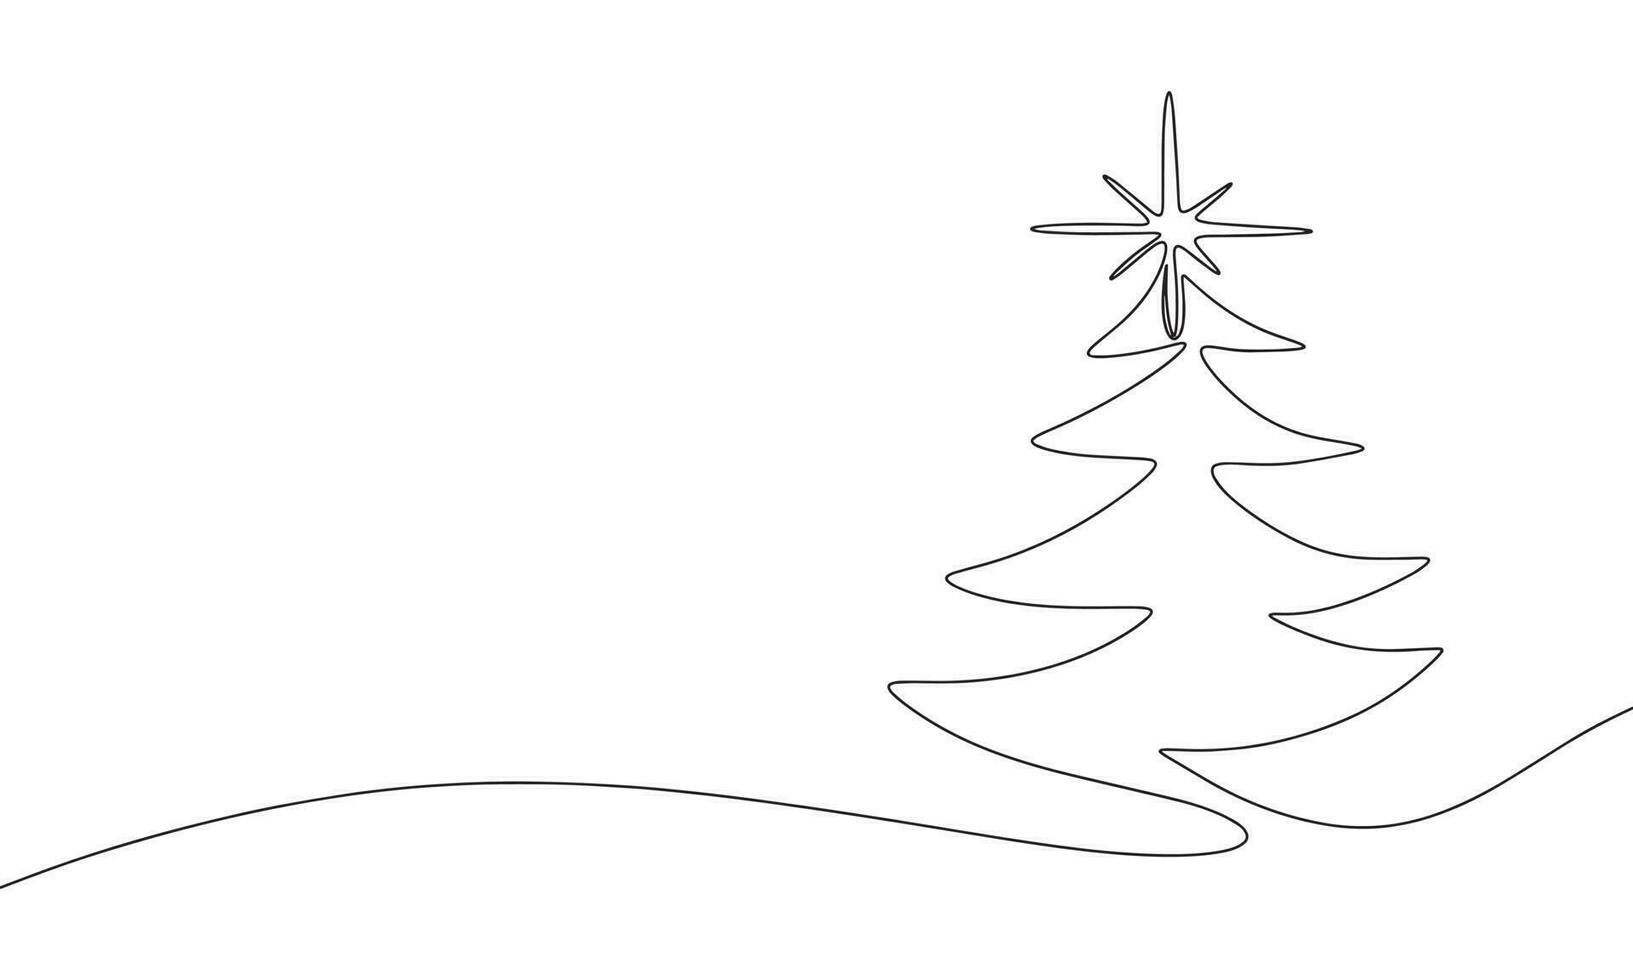 Christmas tree isolated on white background. One line continuous spruce, fir tree. Line art outline vector illustration.